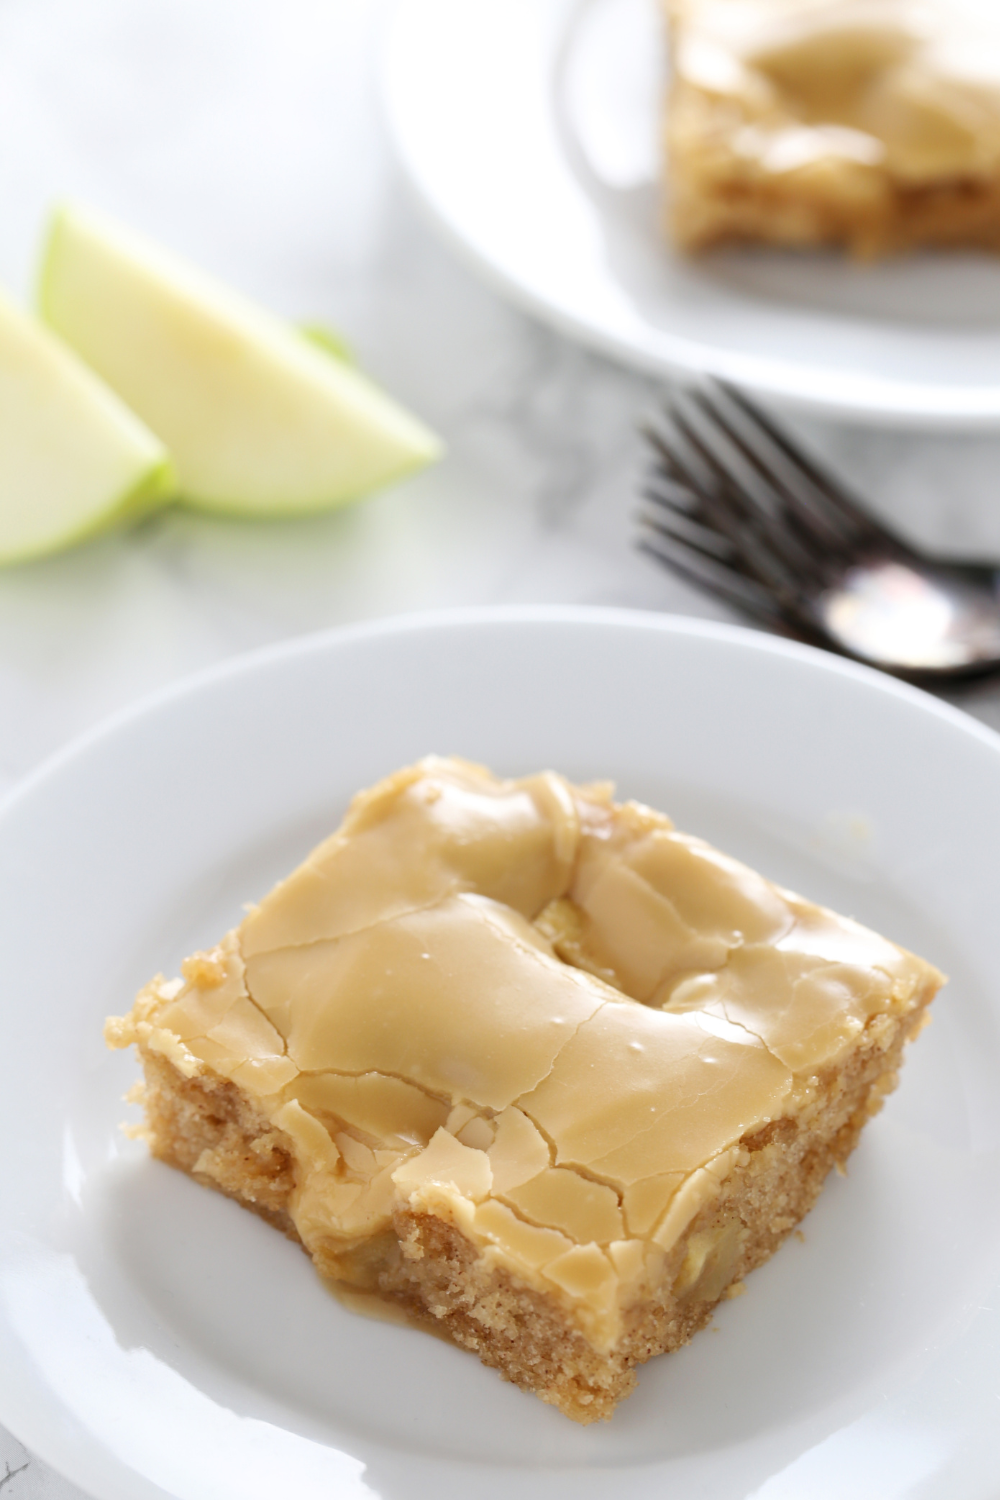 a slice of Salted Caramel Apple Sheet Cake on a plate with a fork, ready to serve